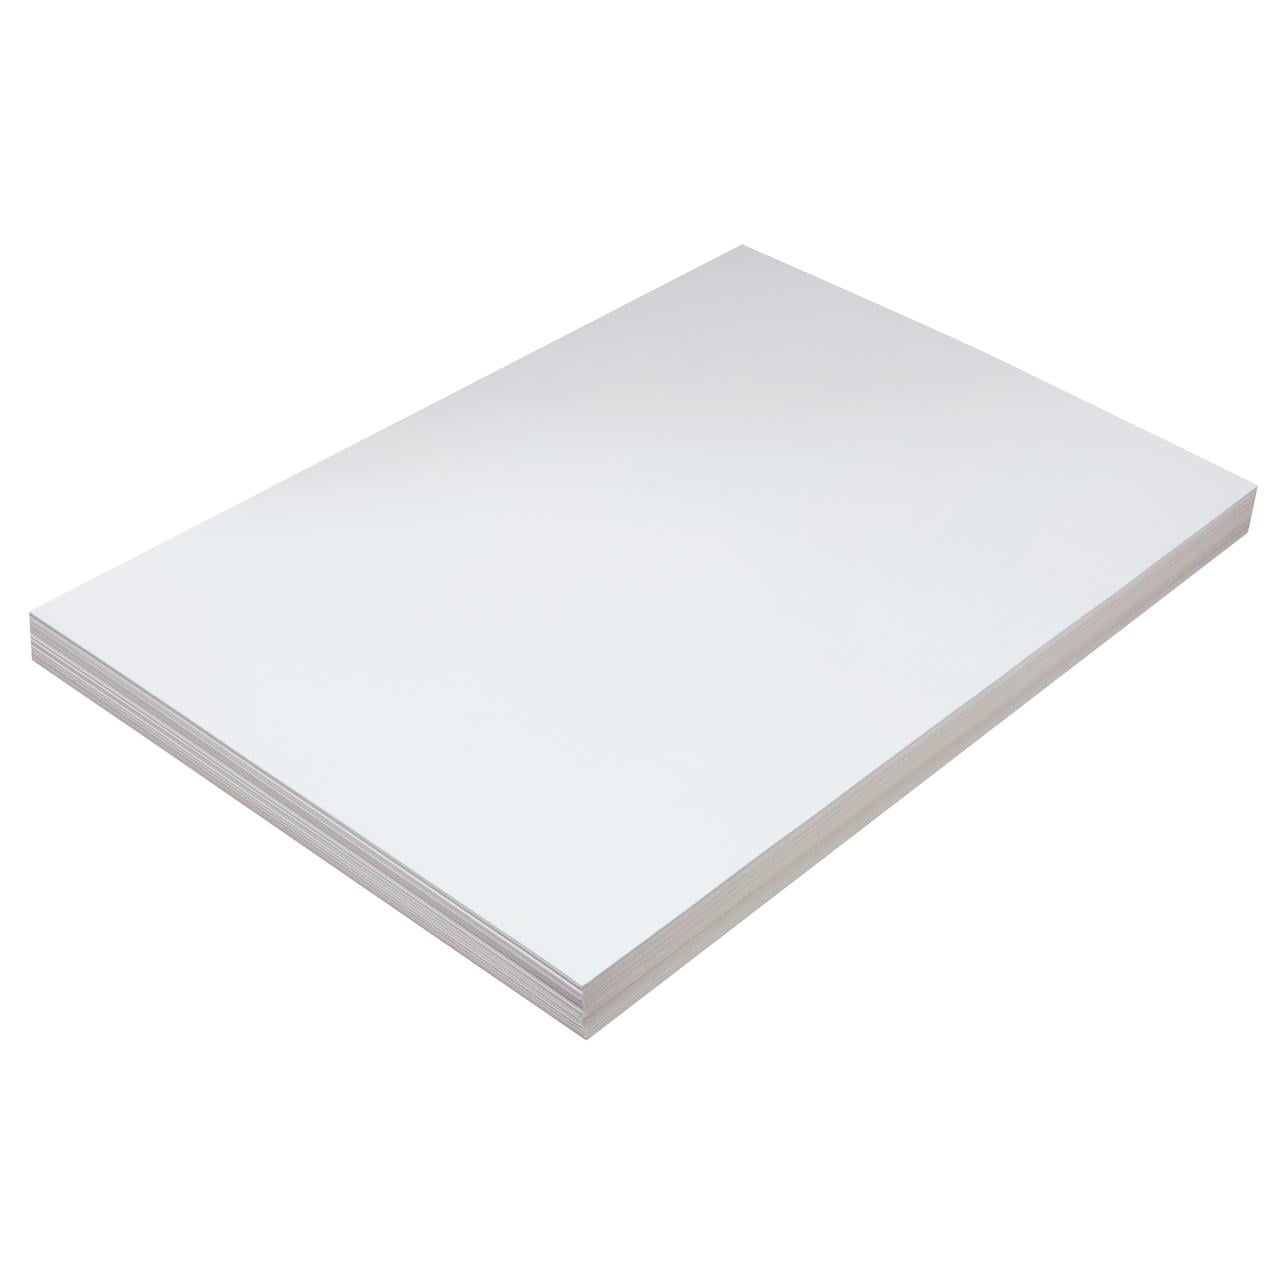 Card Stock White 100 Sheets - Pacon Creative Products